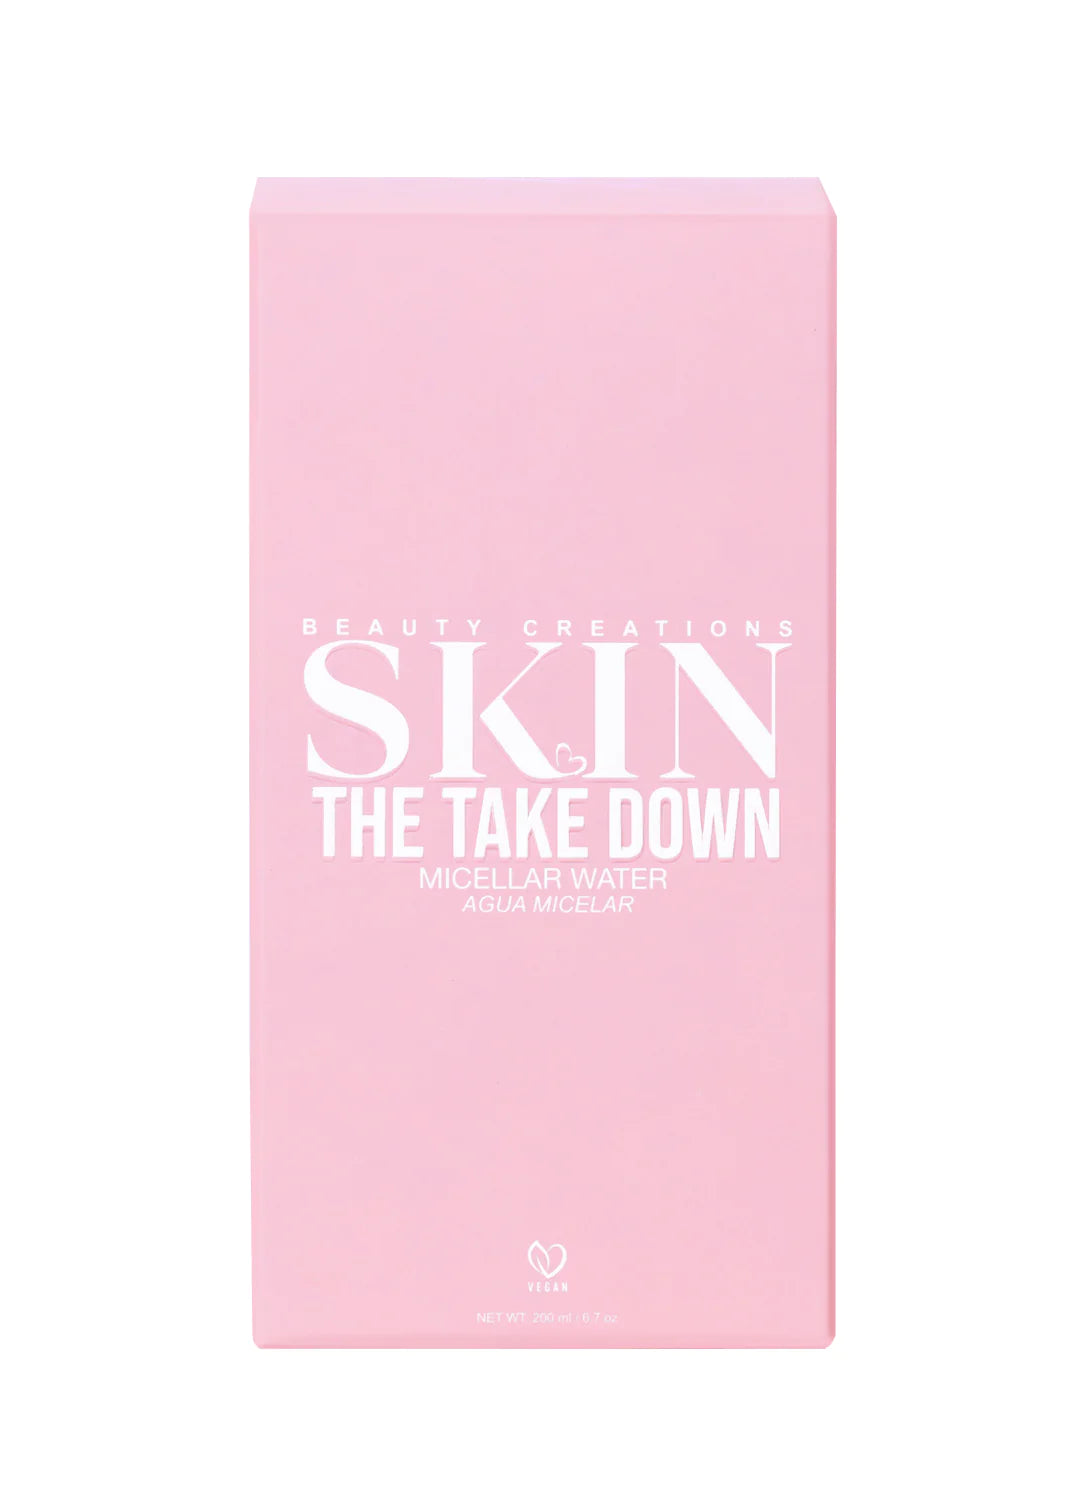 Beauty Creations - The Take Down Micellar Water